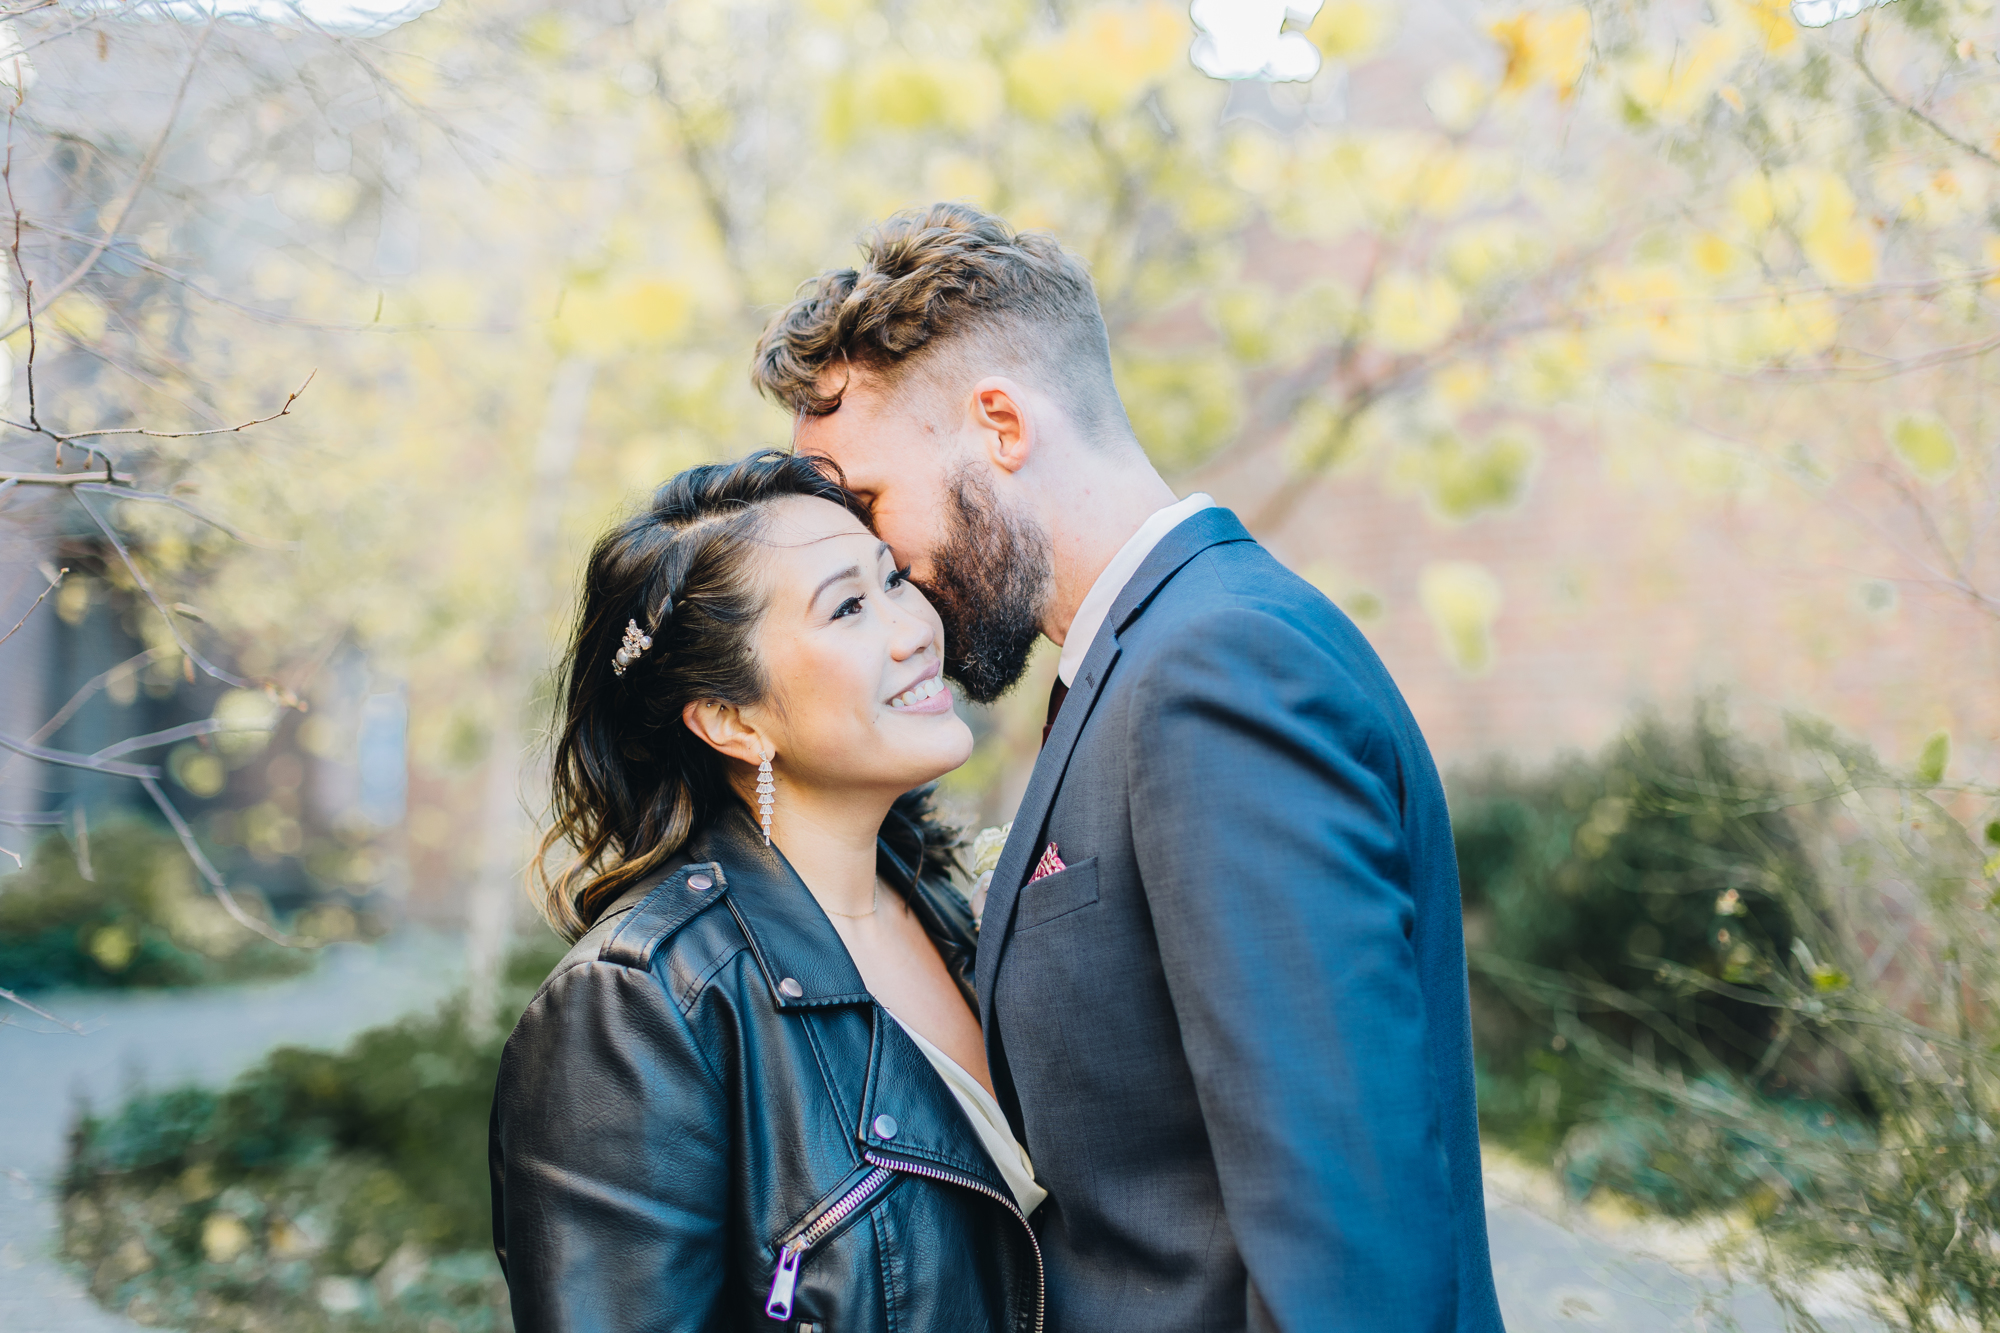 Loving Fall DUMBO Elopement with NYC views and foliage